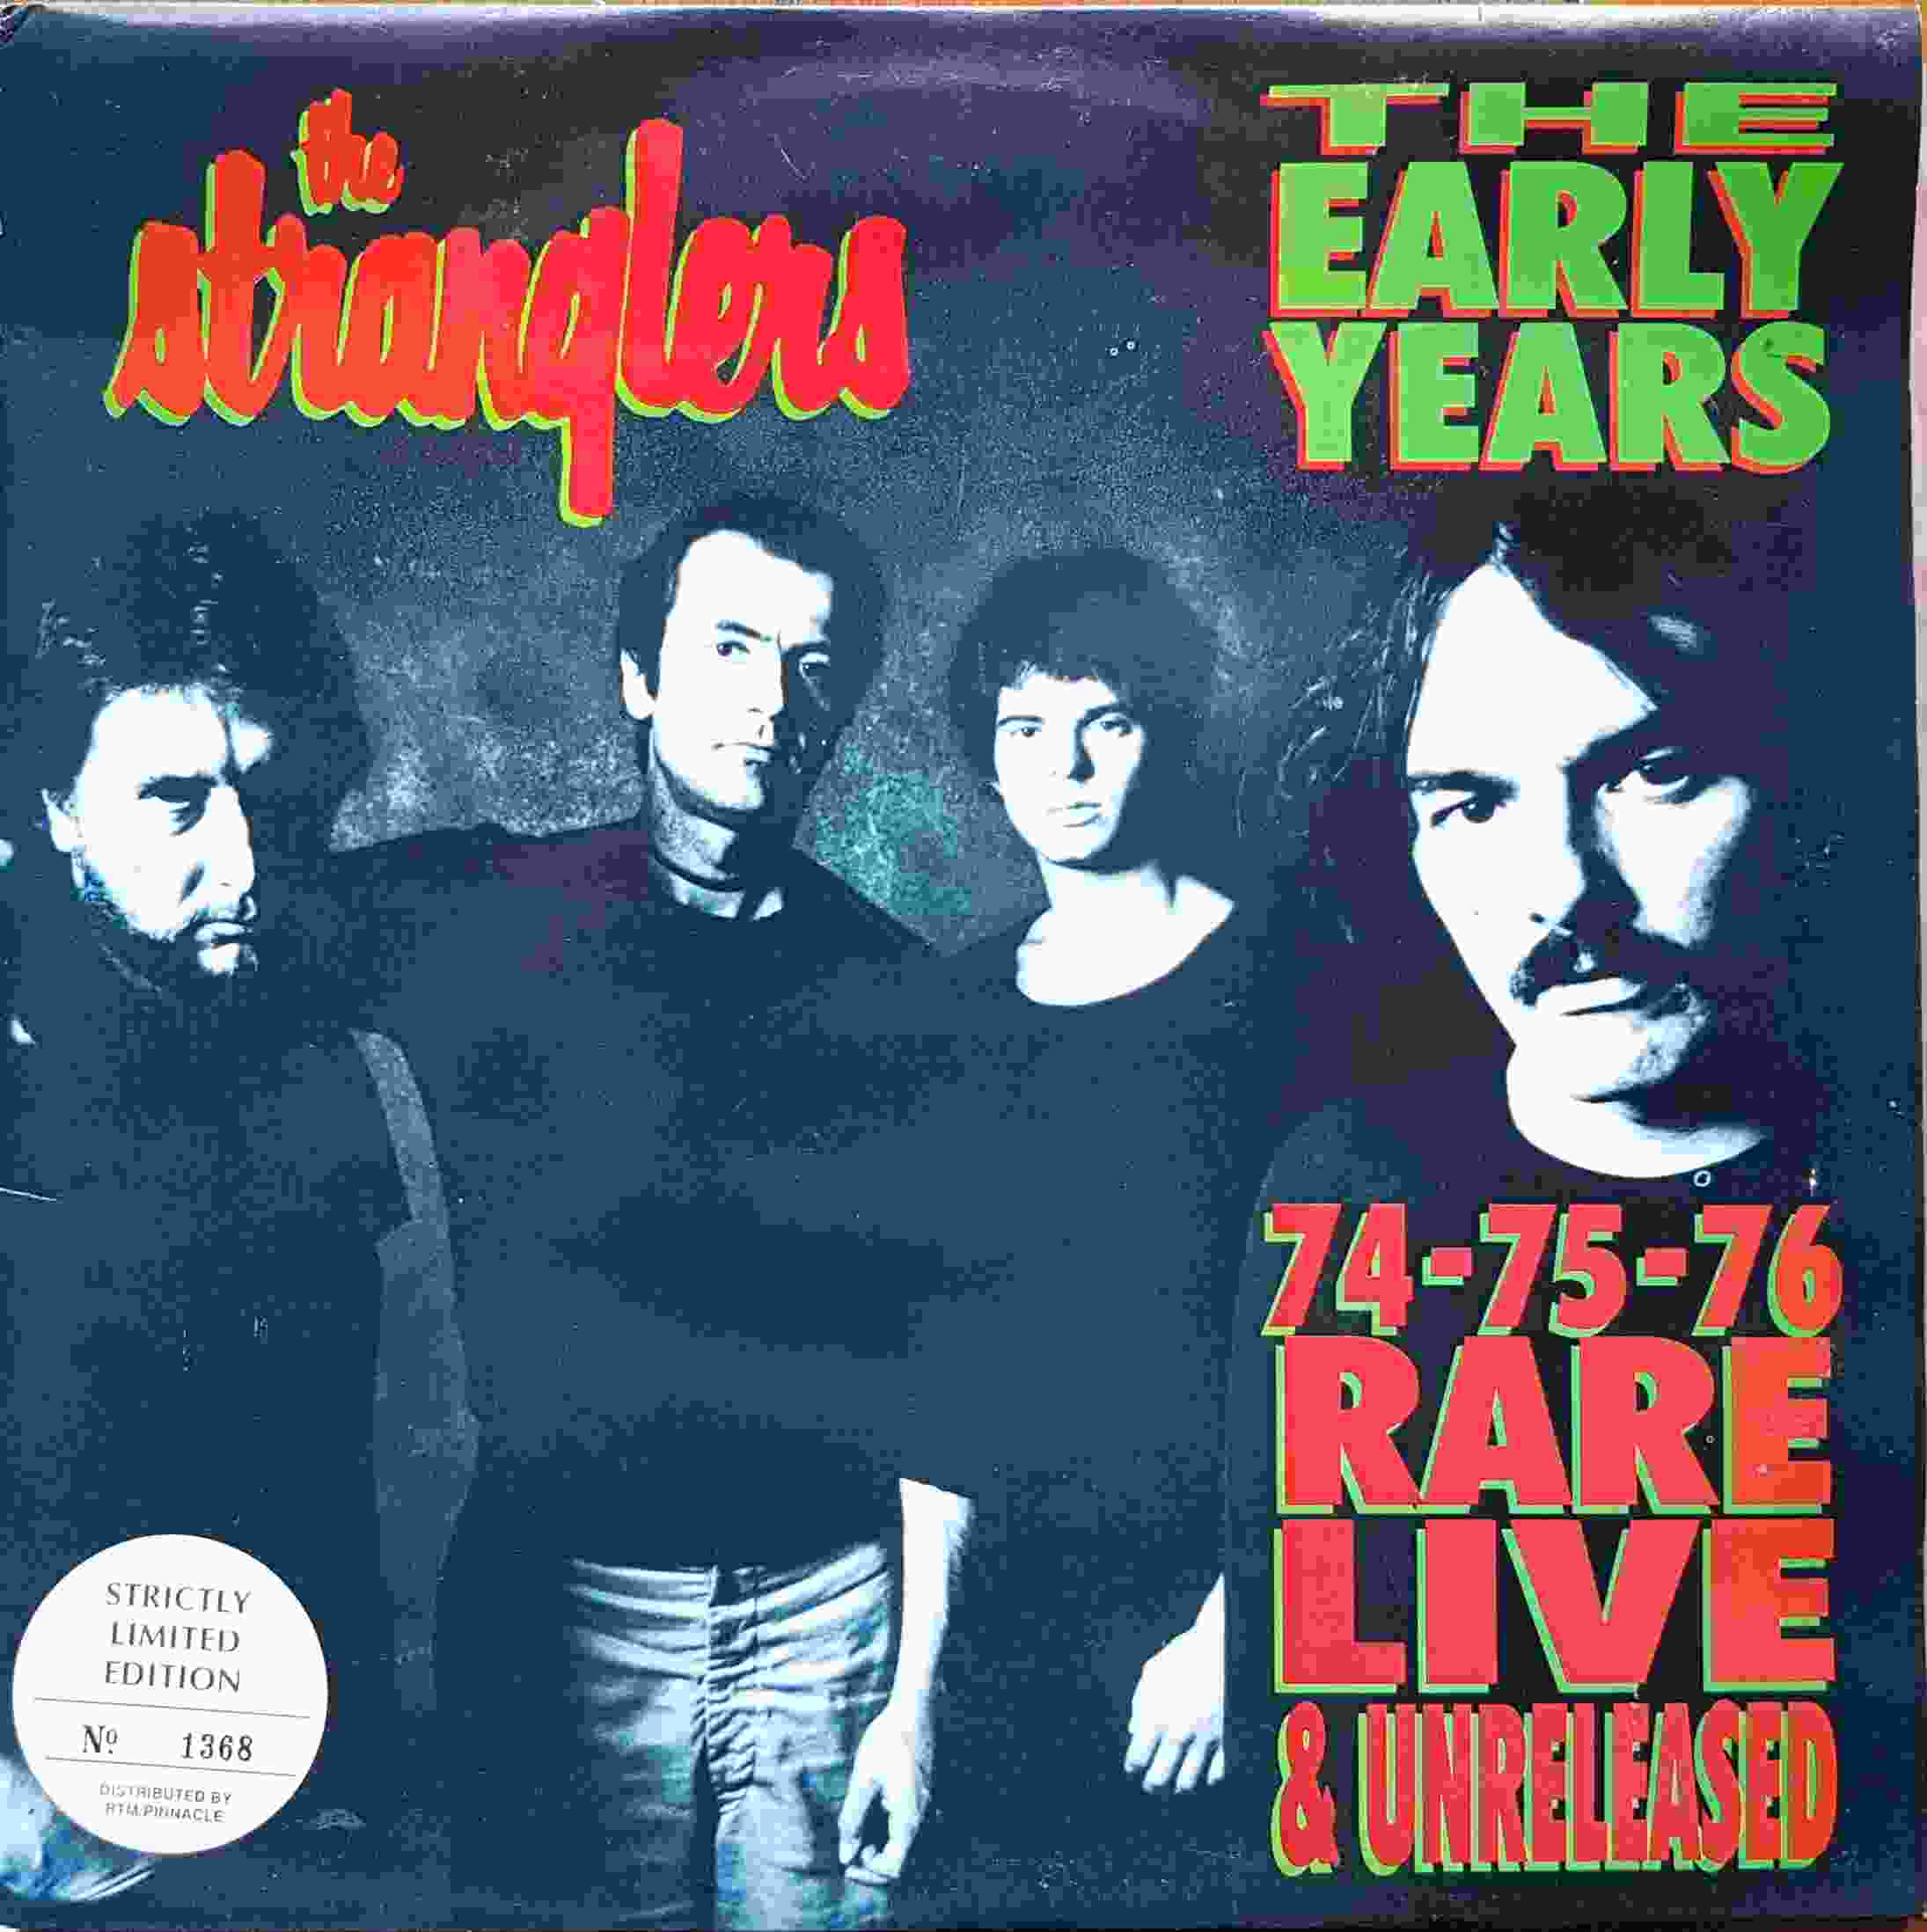 Picture of SPEAKDLP 101 The early years 1974 - 1976 by artist The Stranglers rarities/imports